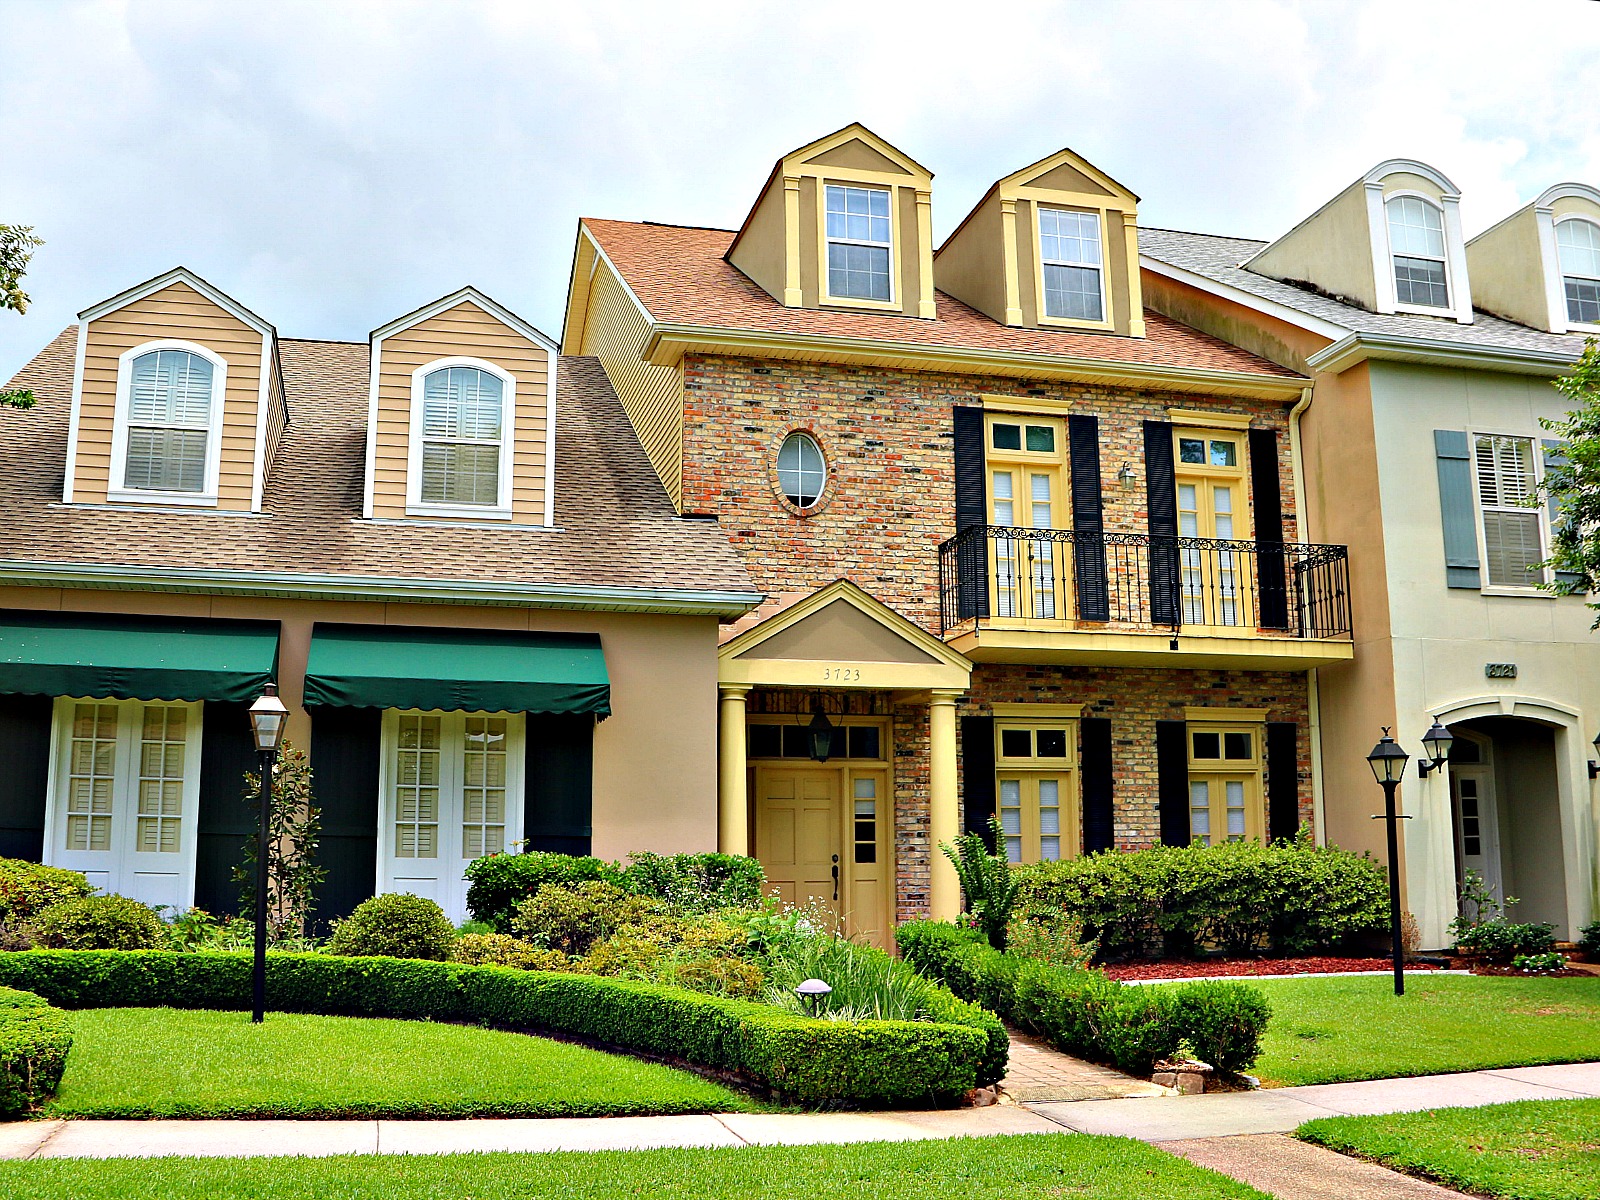 North Hullen Townhomes in Metairie,La. 70002 - Old Metairie Real Estate, Homes & Condos